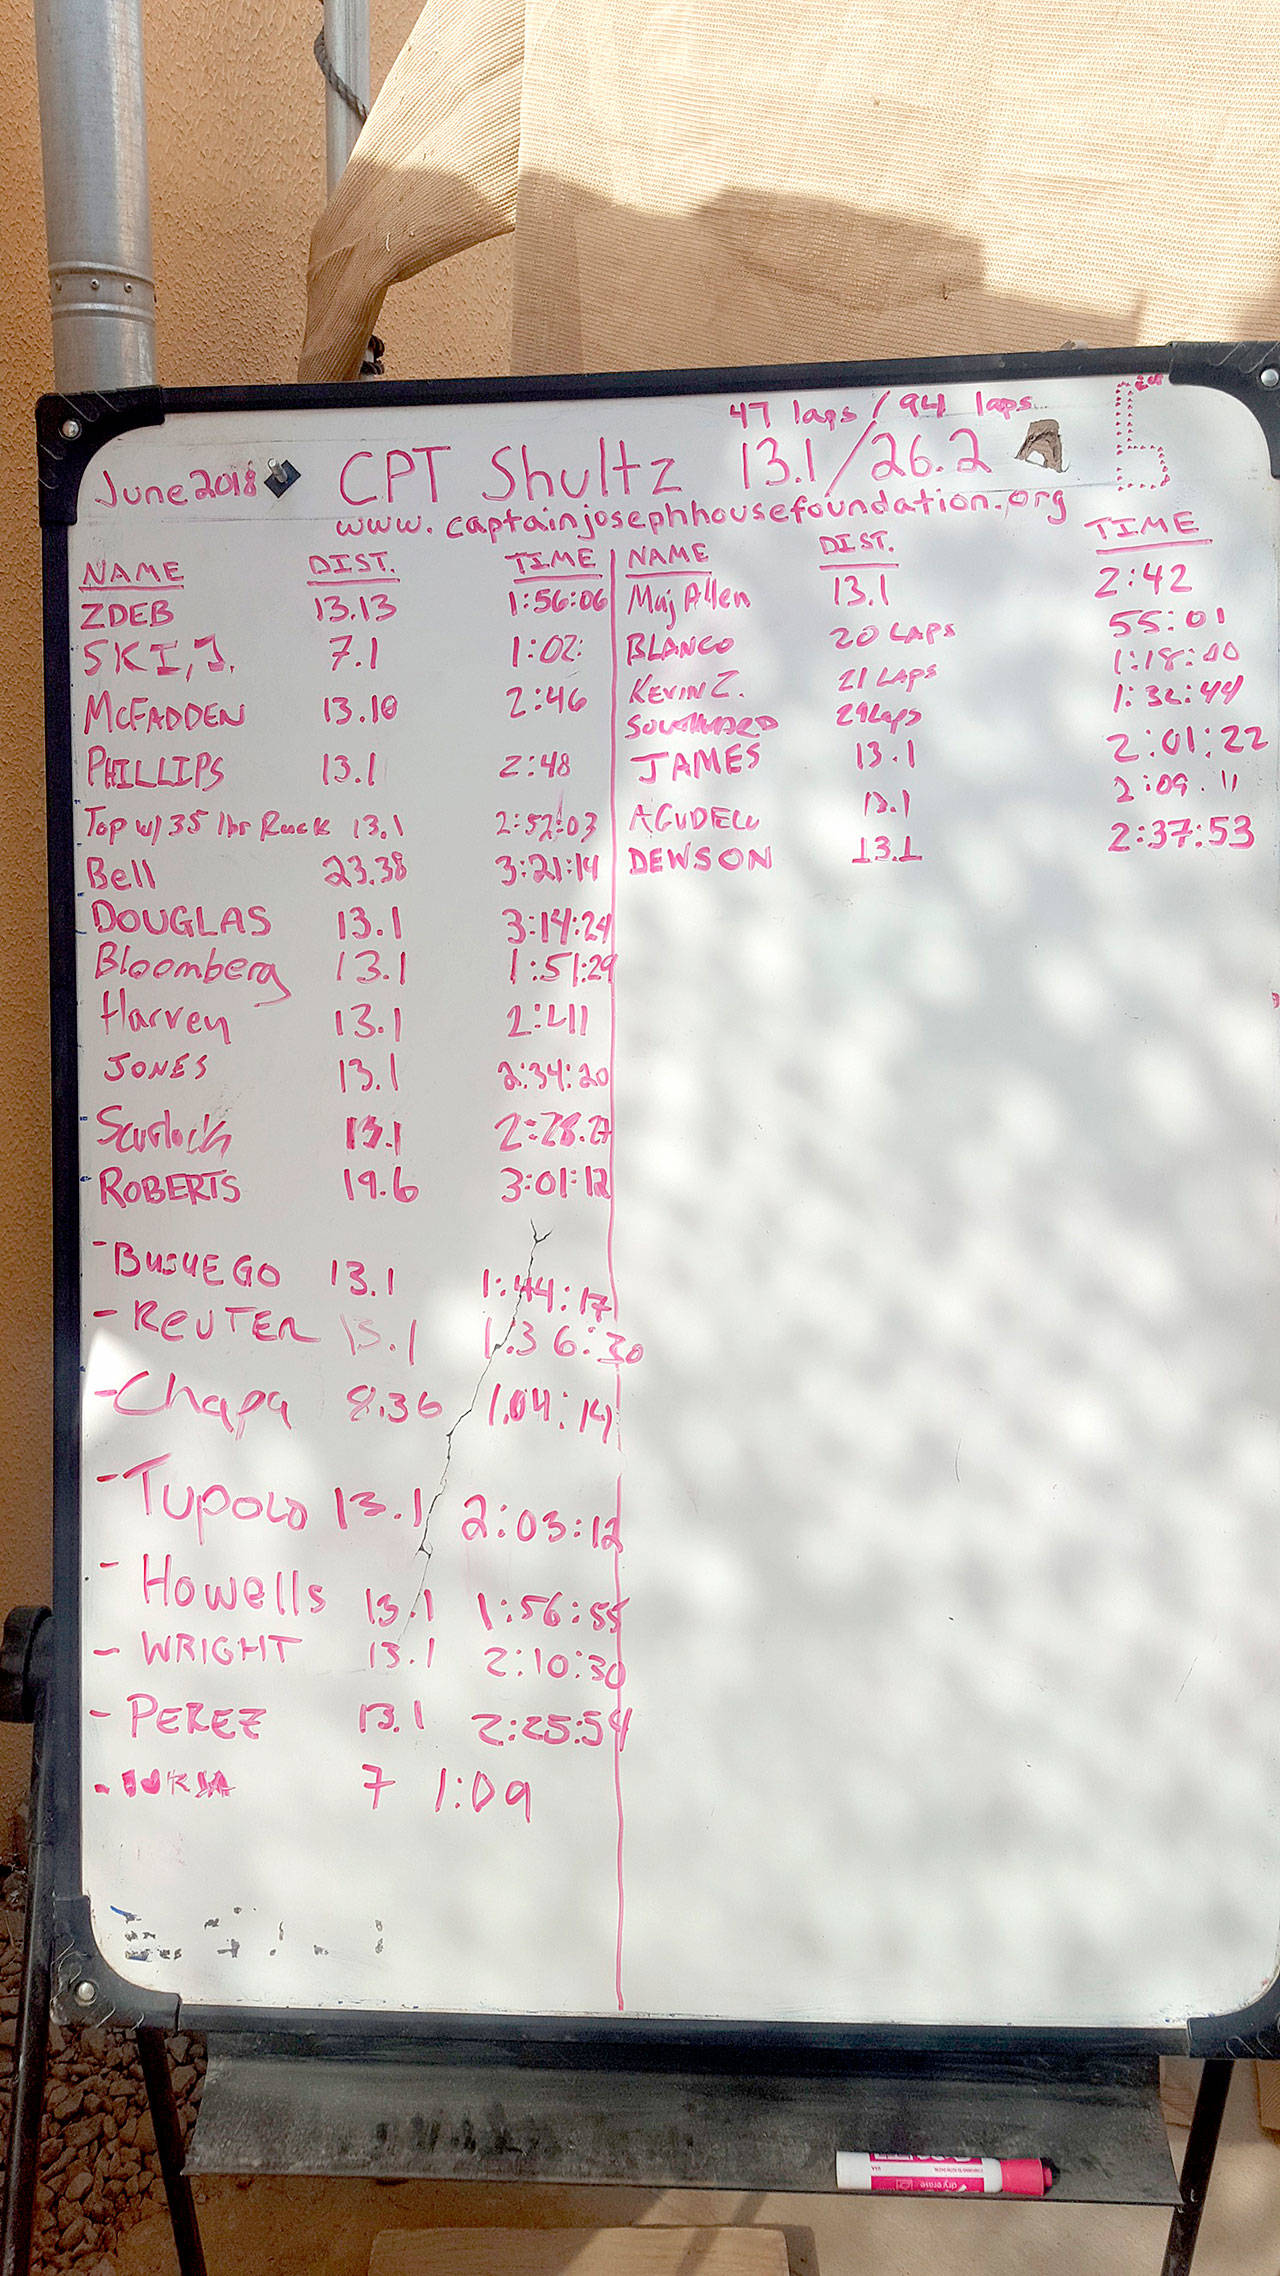 This board at a U.S. military base in Afghanistan shows the progress of a number of runners participating in a Run for Joe “shadow run” held in conjunction with the North Olympic Discovery Marathon this week.